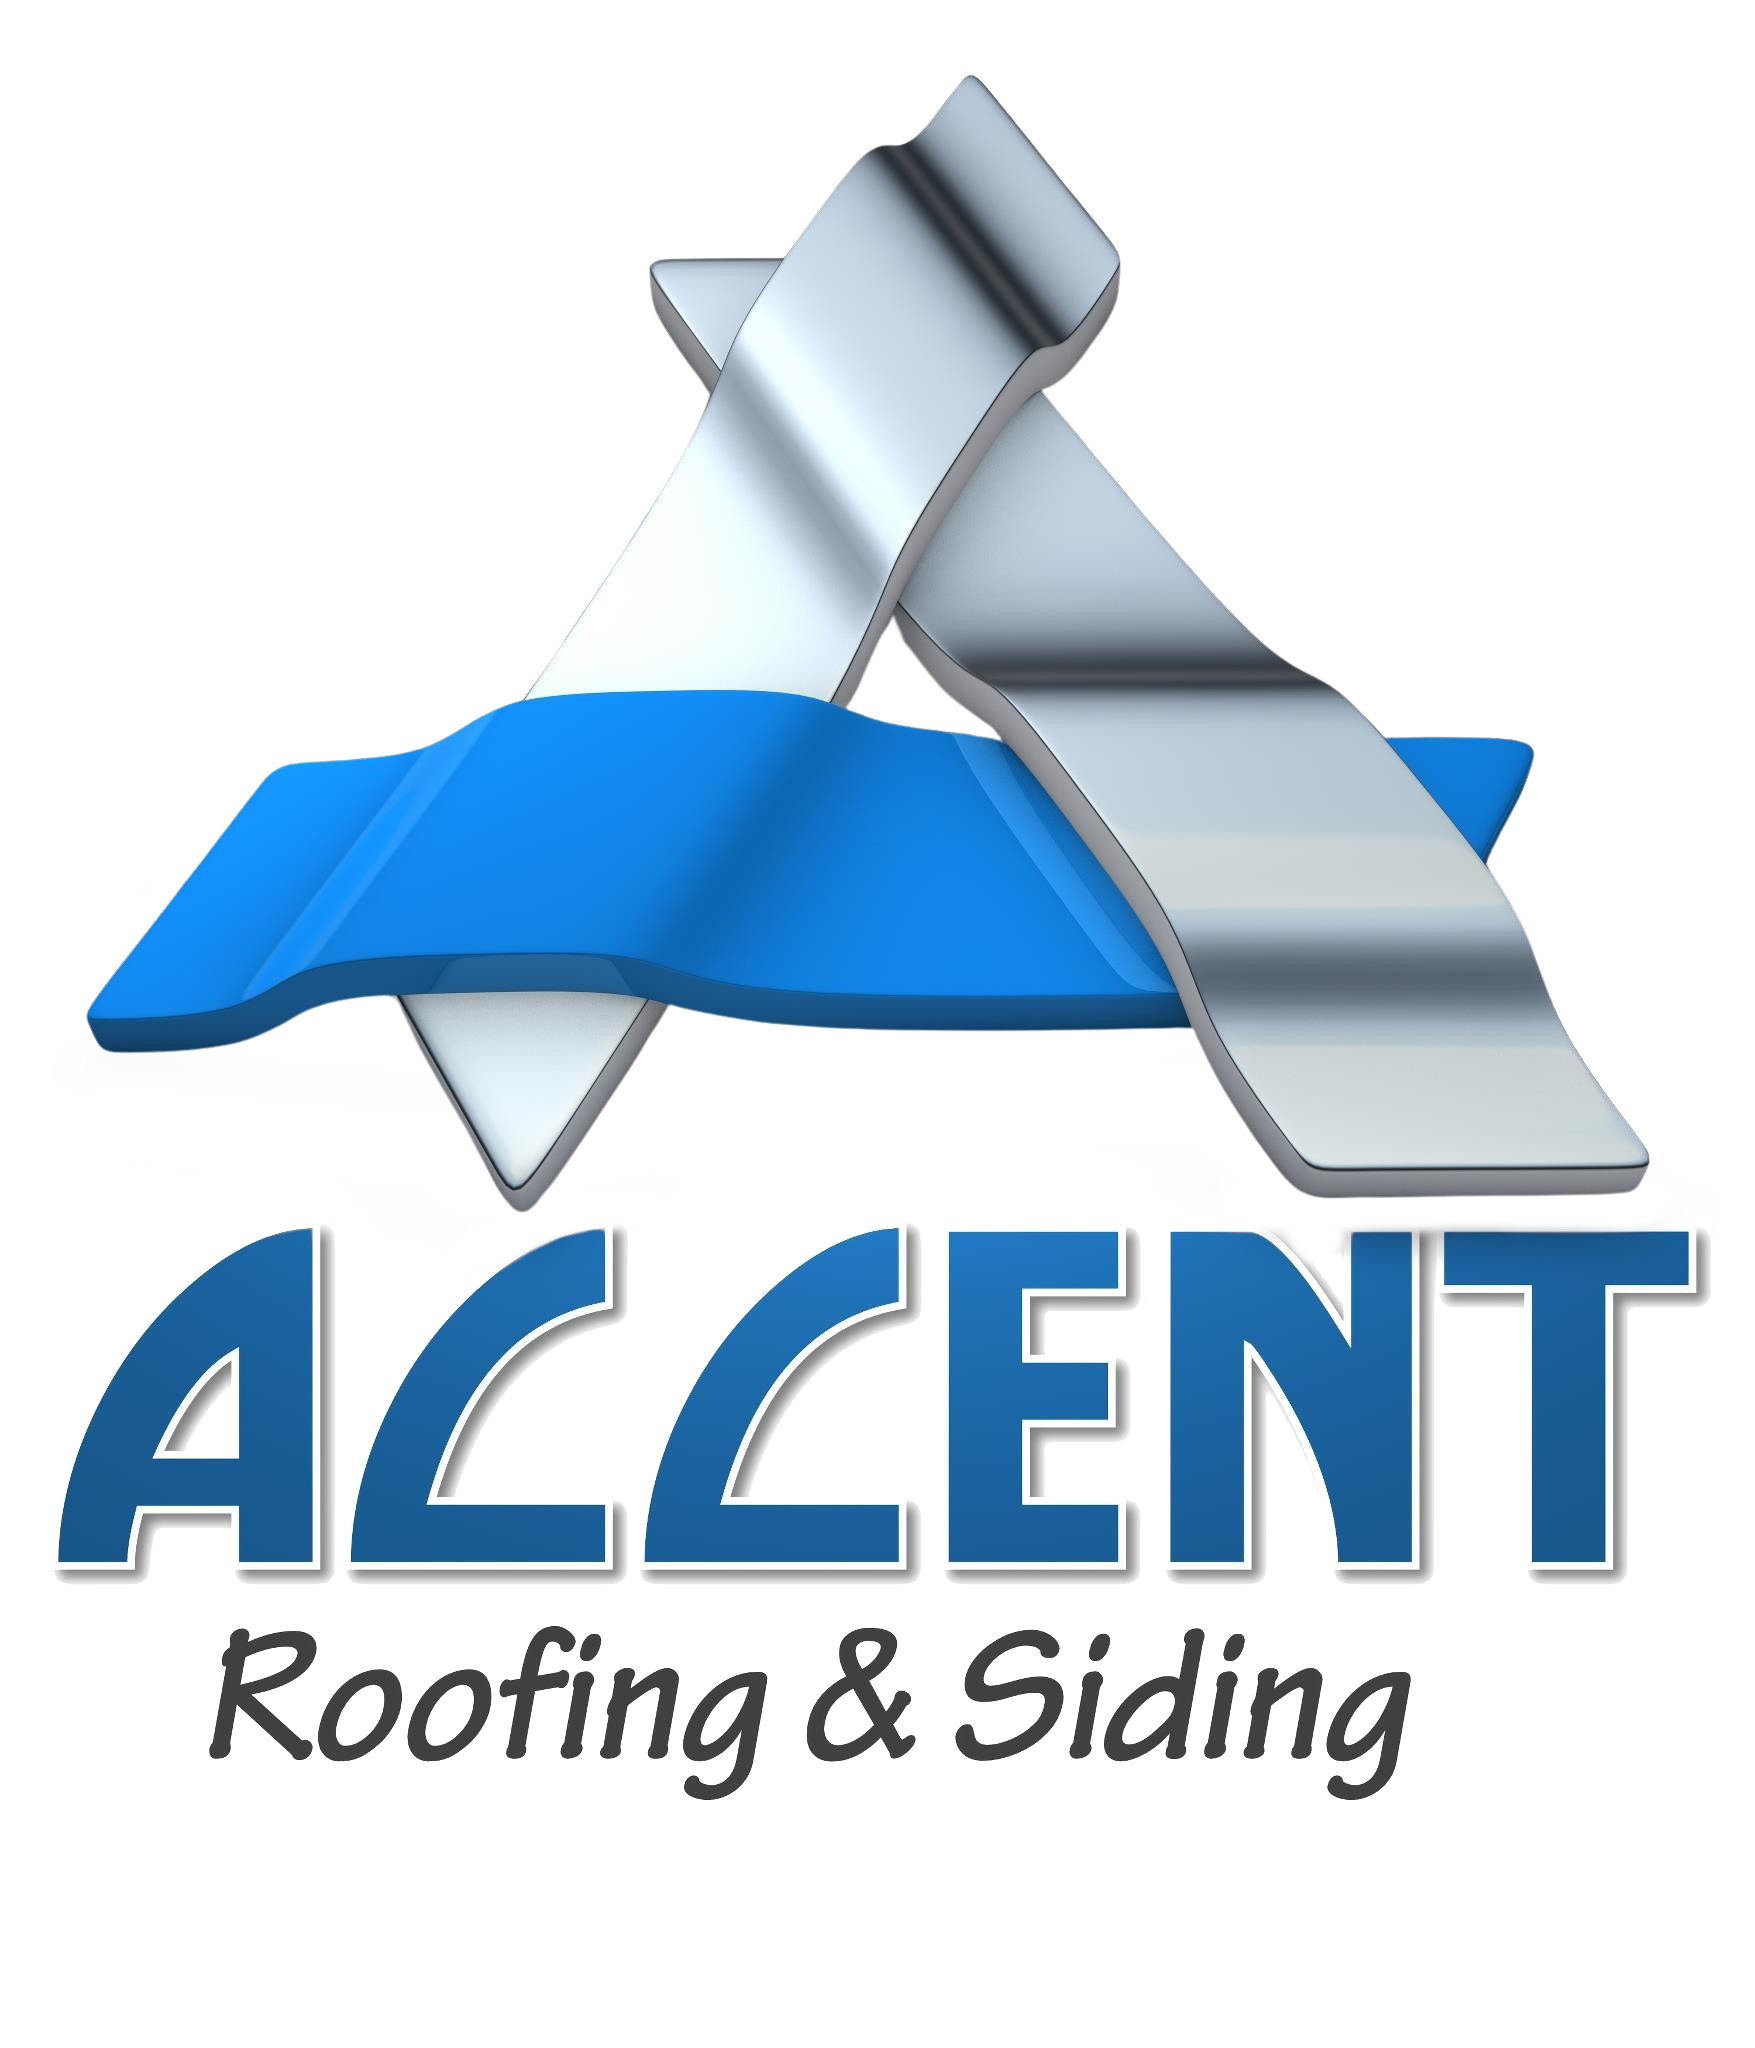 Accent Roofing & Siding Logo.